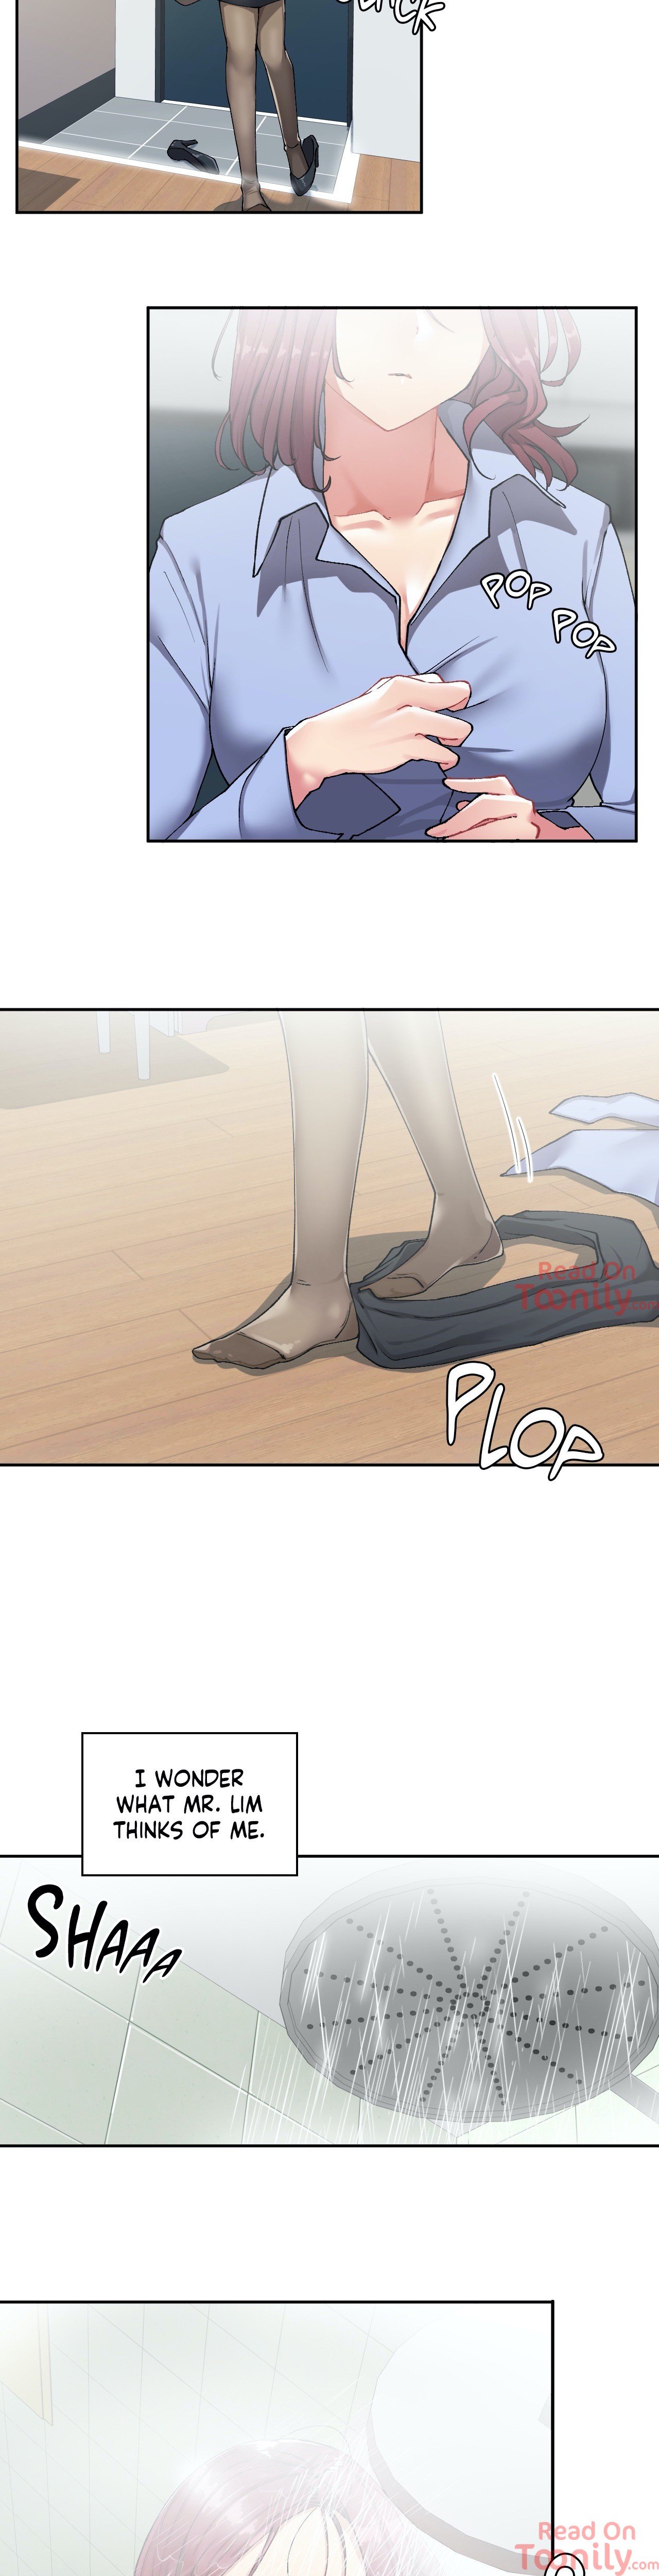 The Girl Hiding in the Wall - Chapter 11 Page 6